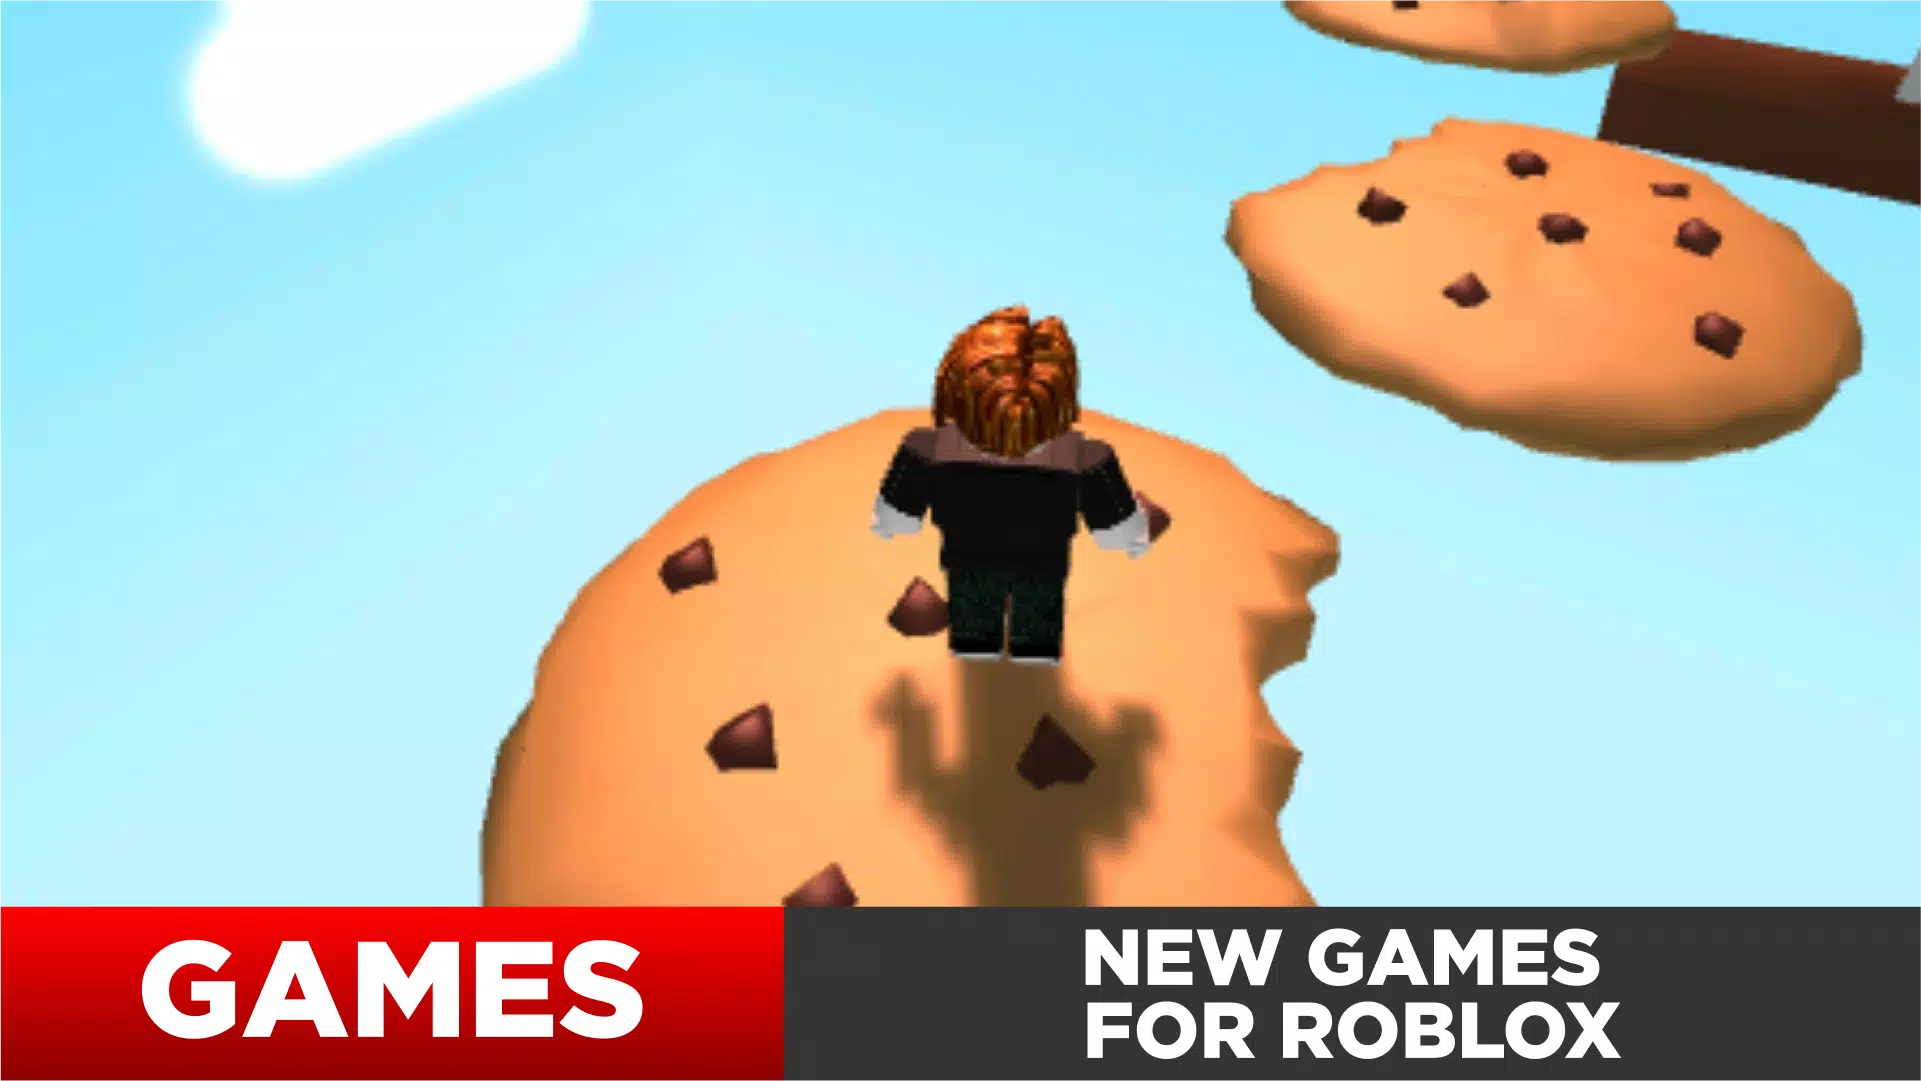 Download Roblox Studio APK latest v4.0.0 for Android